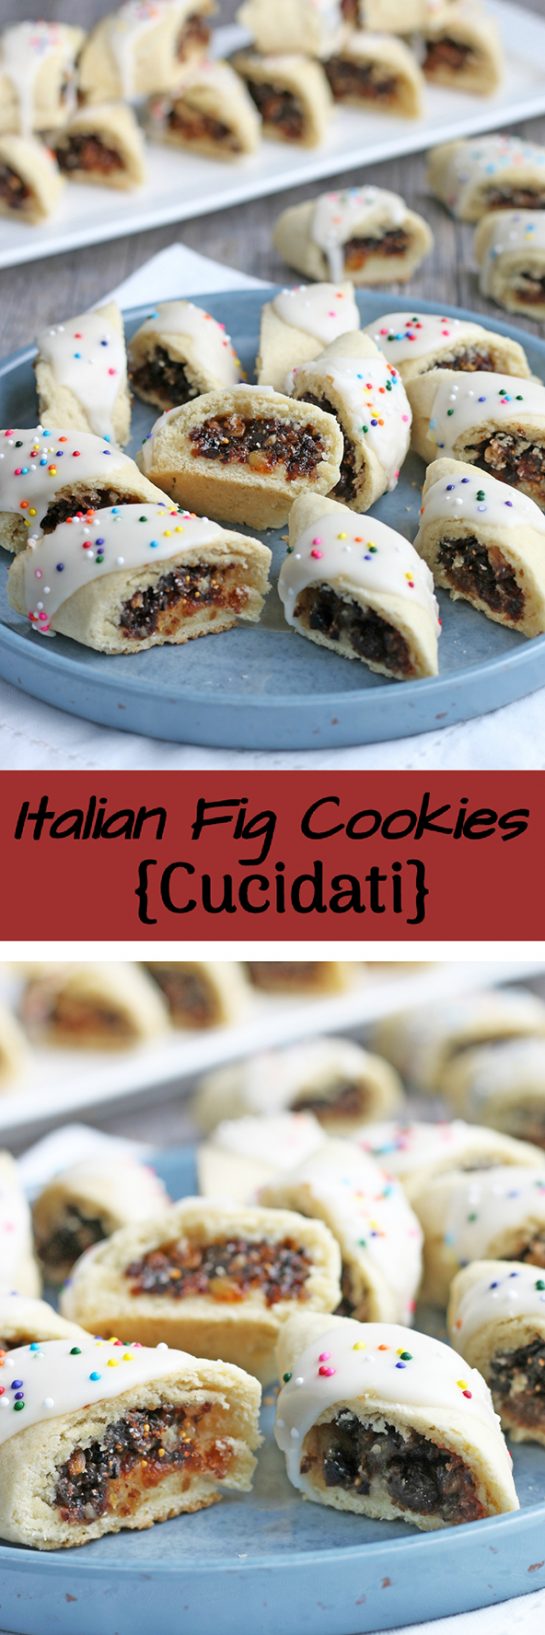 My recipe for fig cookies is easy and delicious! These Italian fig cookies are also called Cucidati! These cookies blend the sharp bright flavor of citrus with a buttery and indulgent cookie shell. 